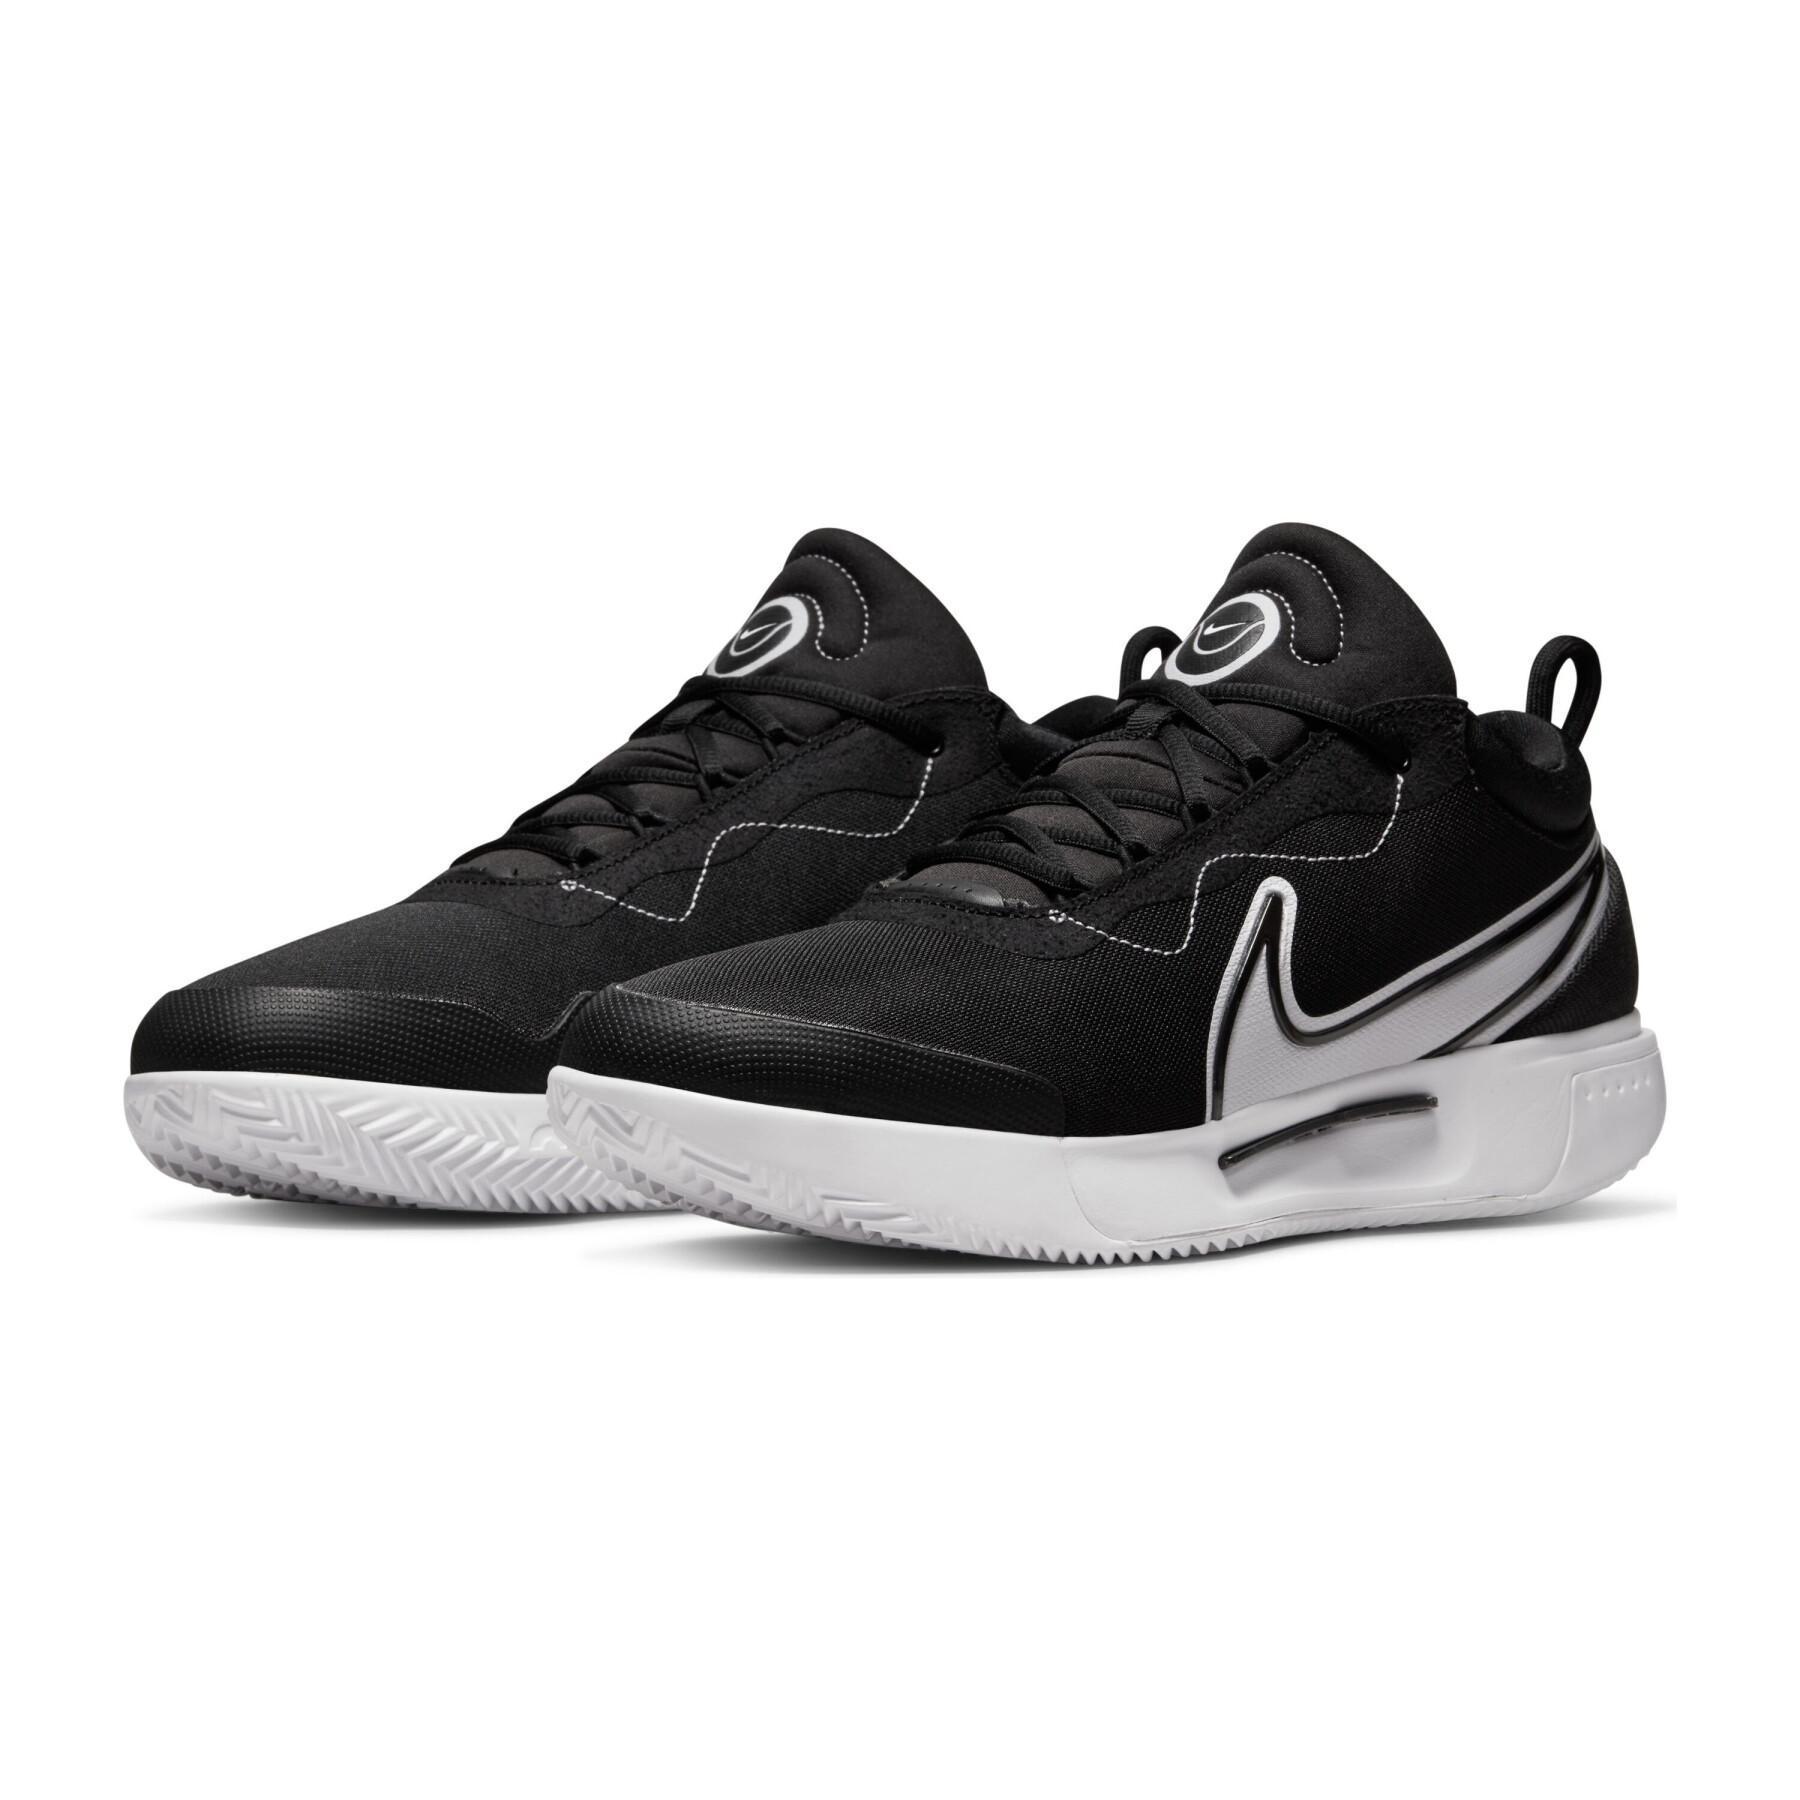 Tennis shoes Nike Court Zoom Pro Clay